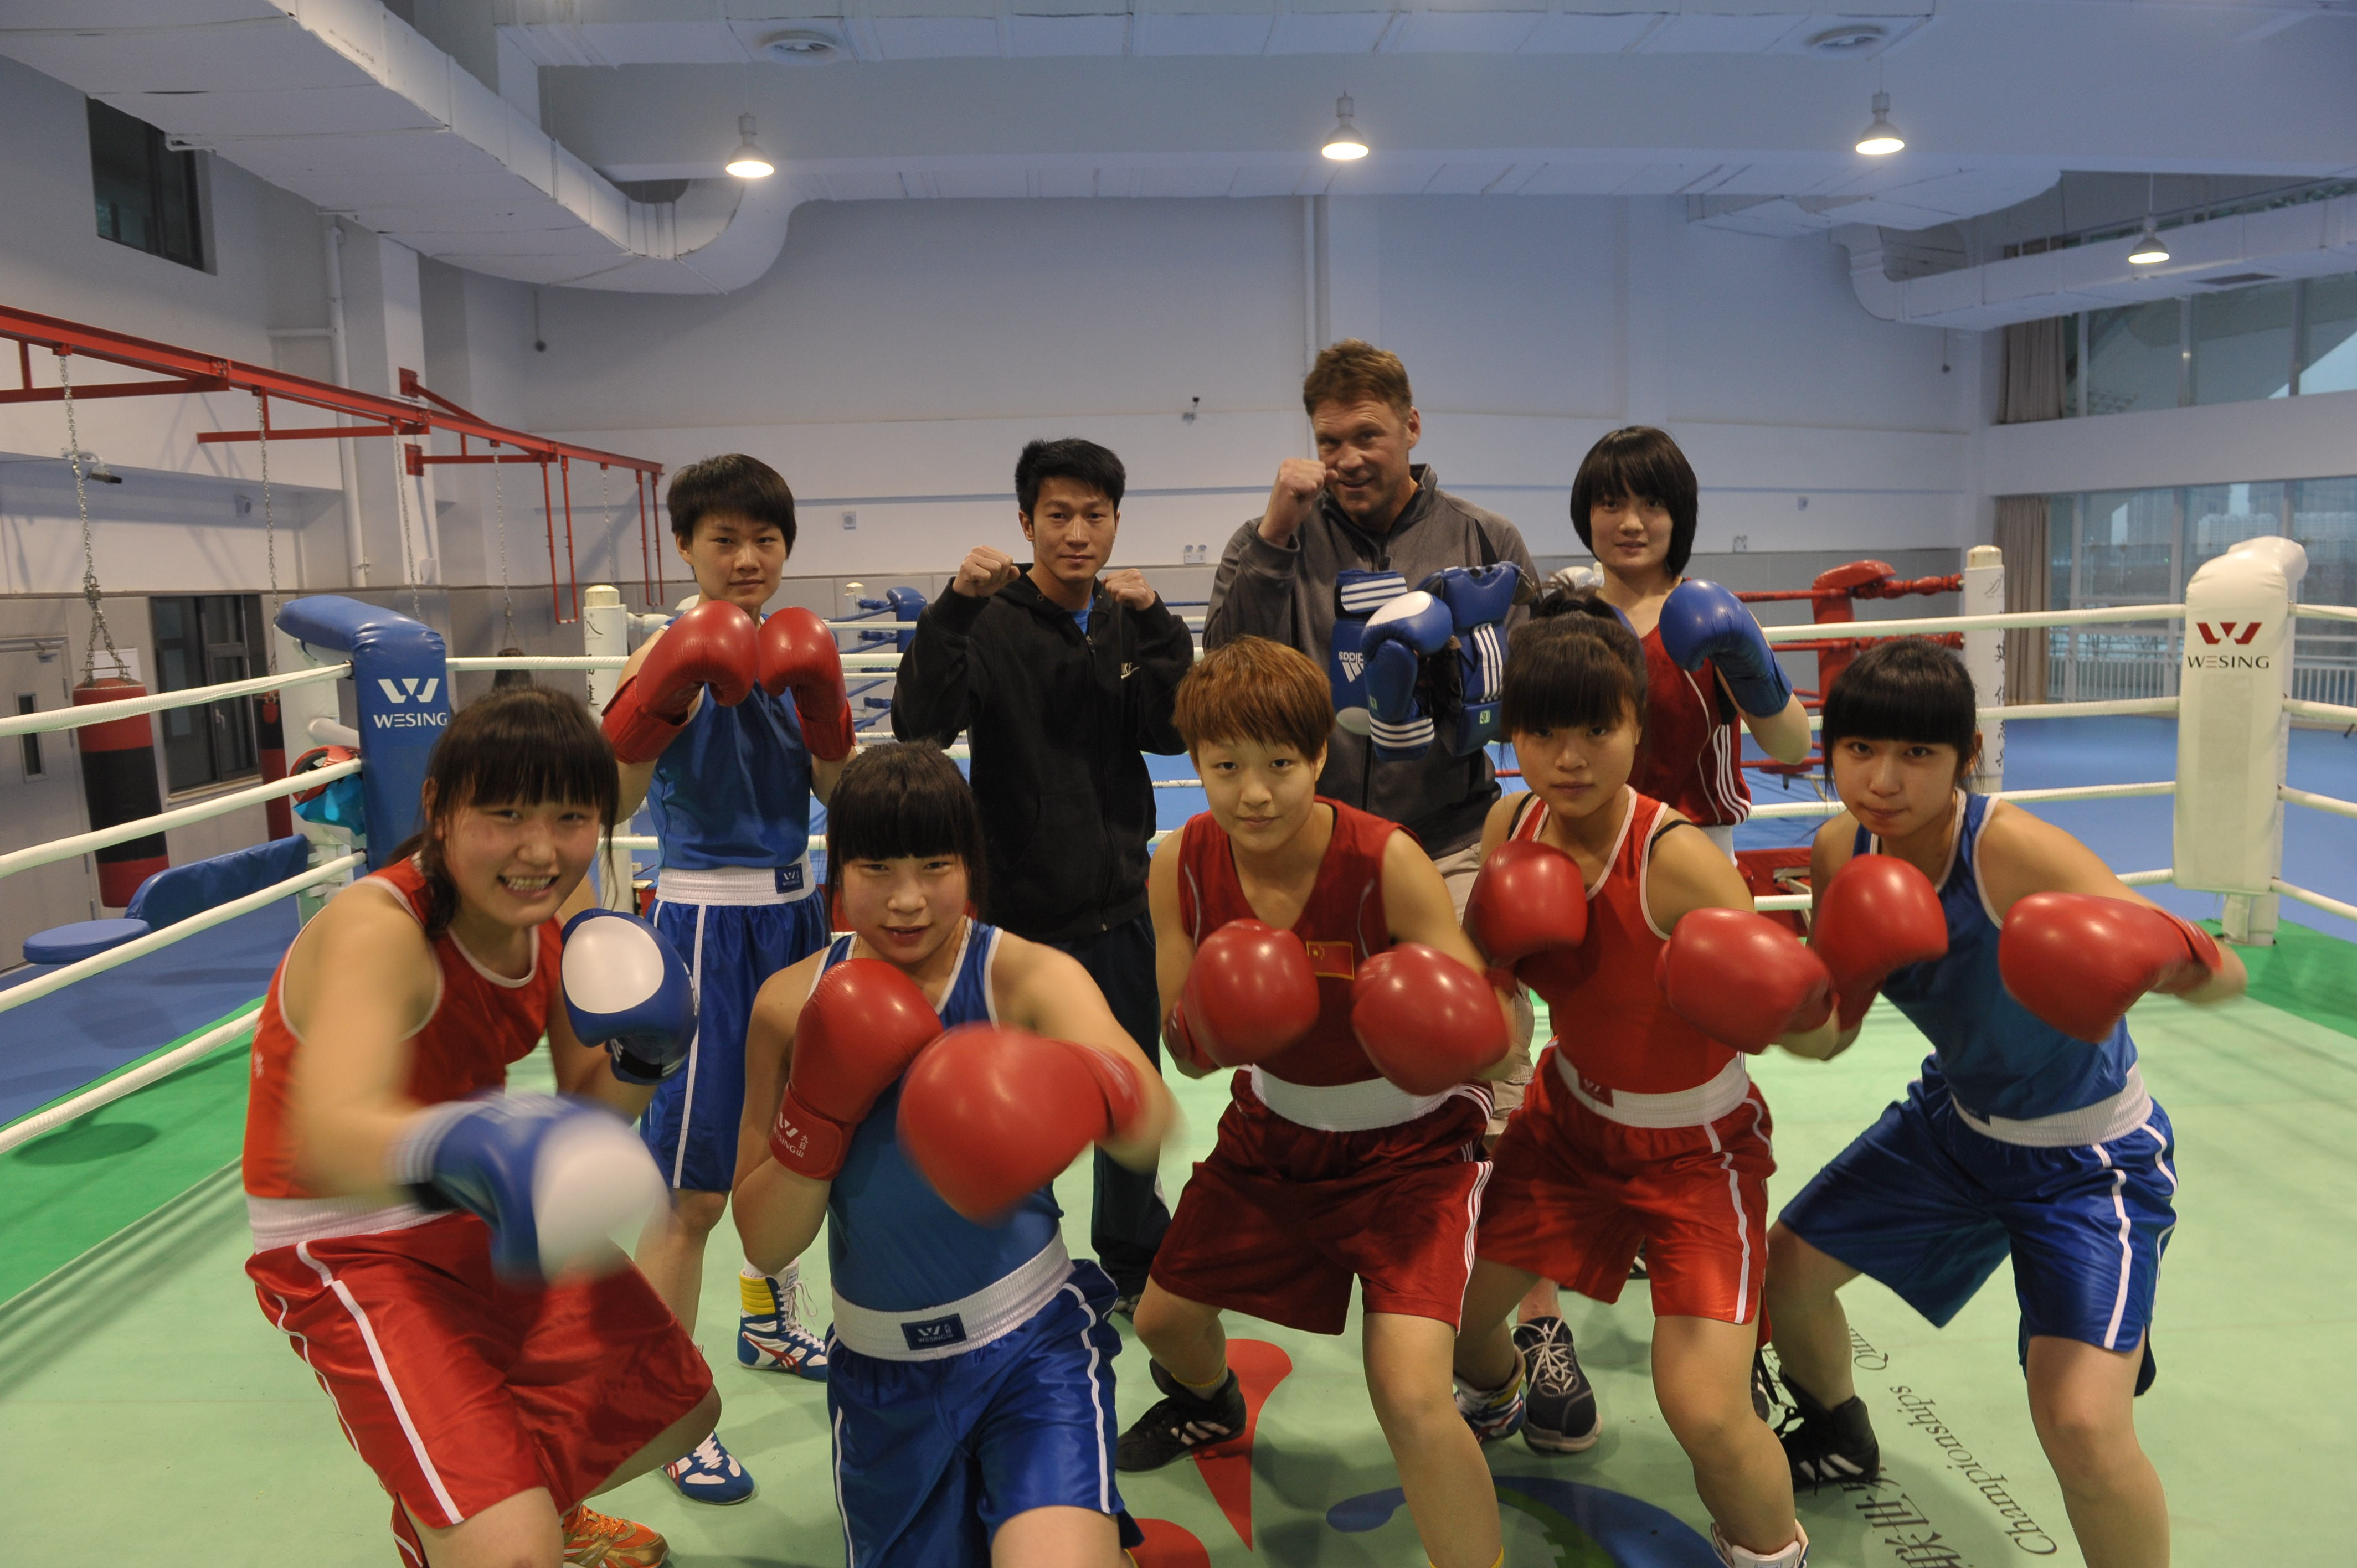 Keith catches a boxing workout with the China National boxing team while filming at the Olympic Training Center in Qian'an China.